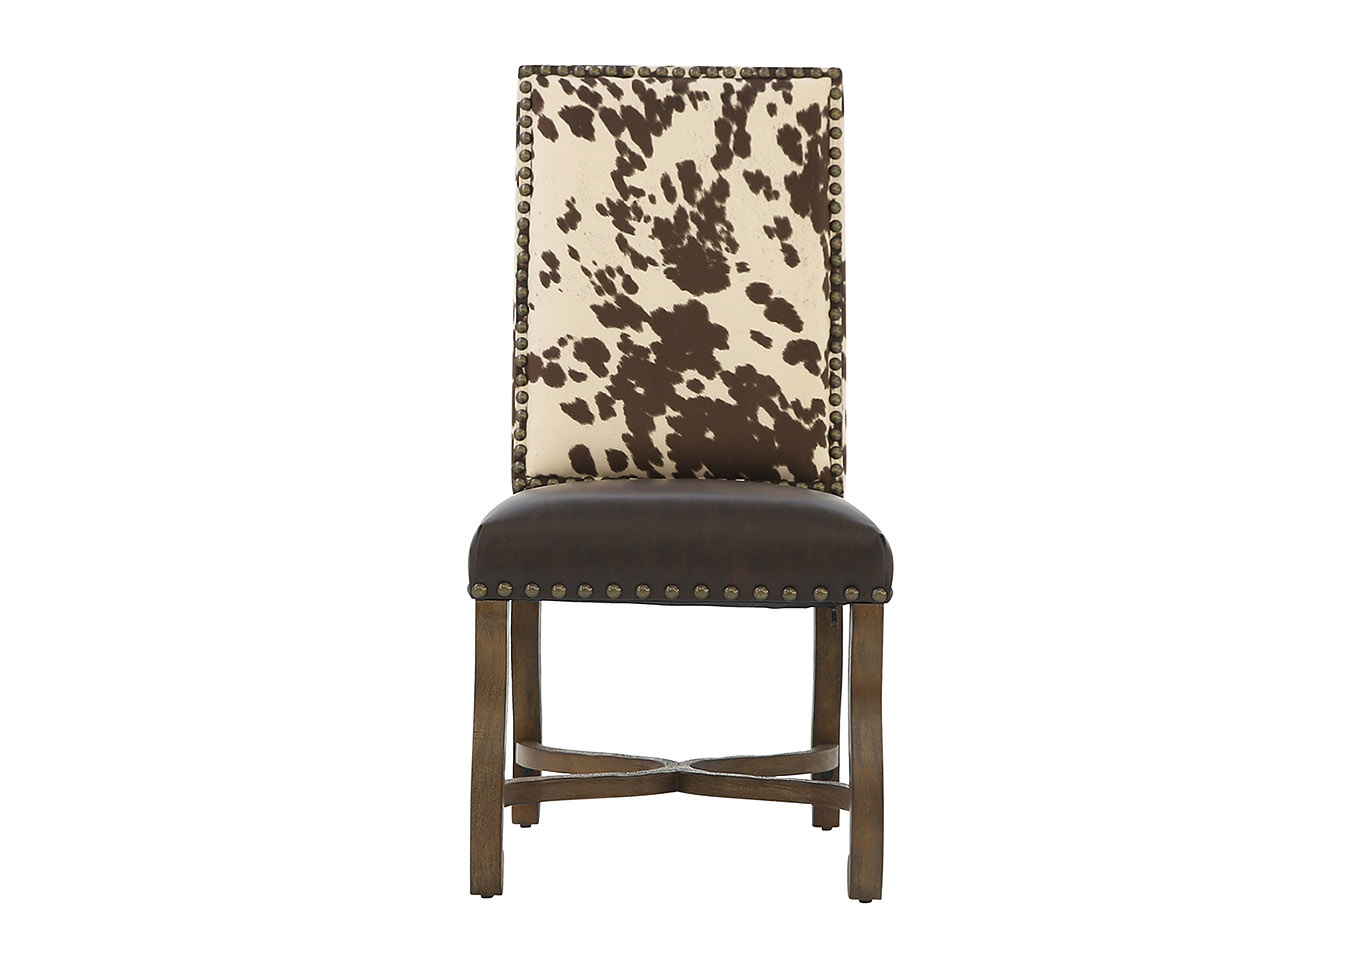 Ivan Smith Mesquite Ranch Leather Faux Cowhide Side Chair